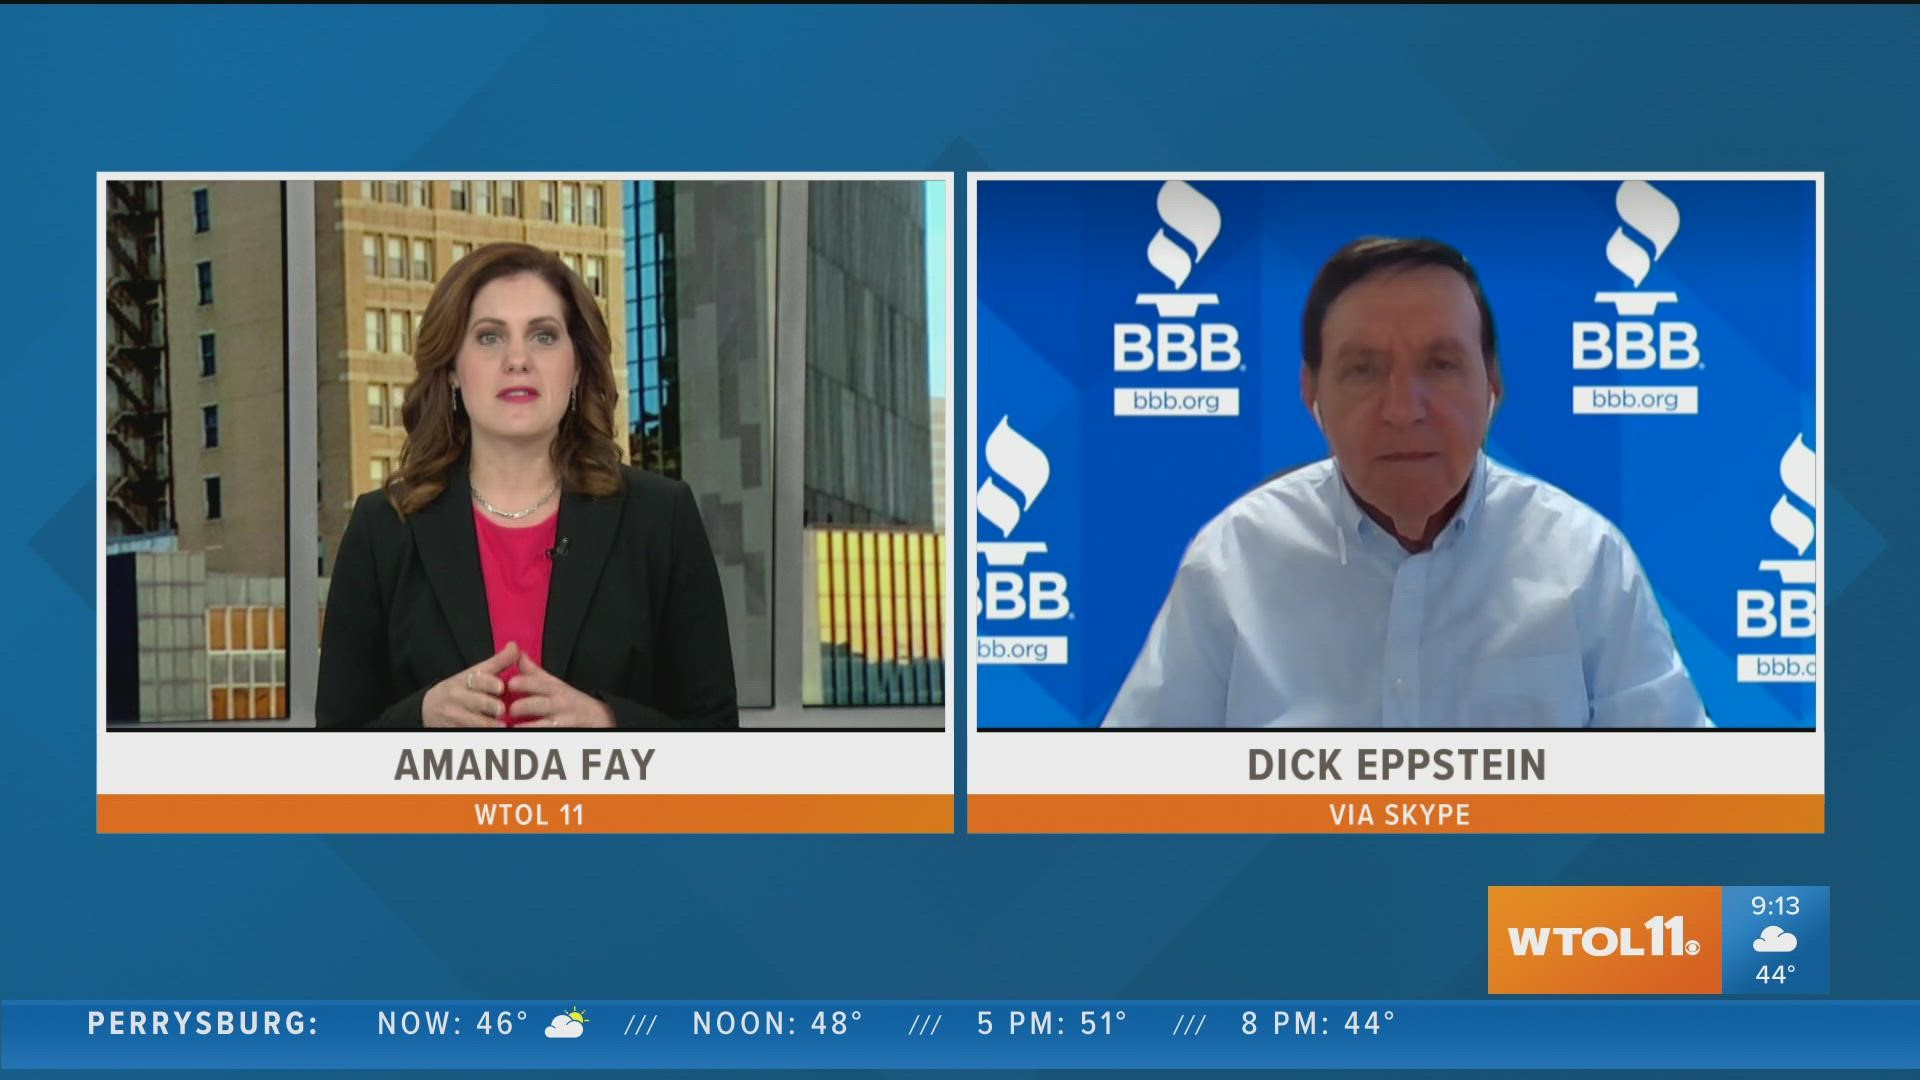 The day after Christmas is two months away, a huge day for returns. The BBB has what to watch out for before you buy something online that you can’t return.